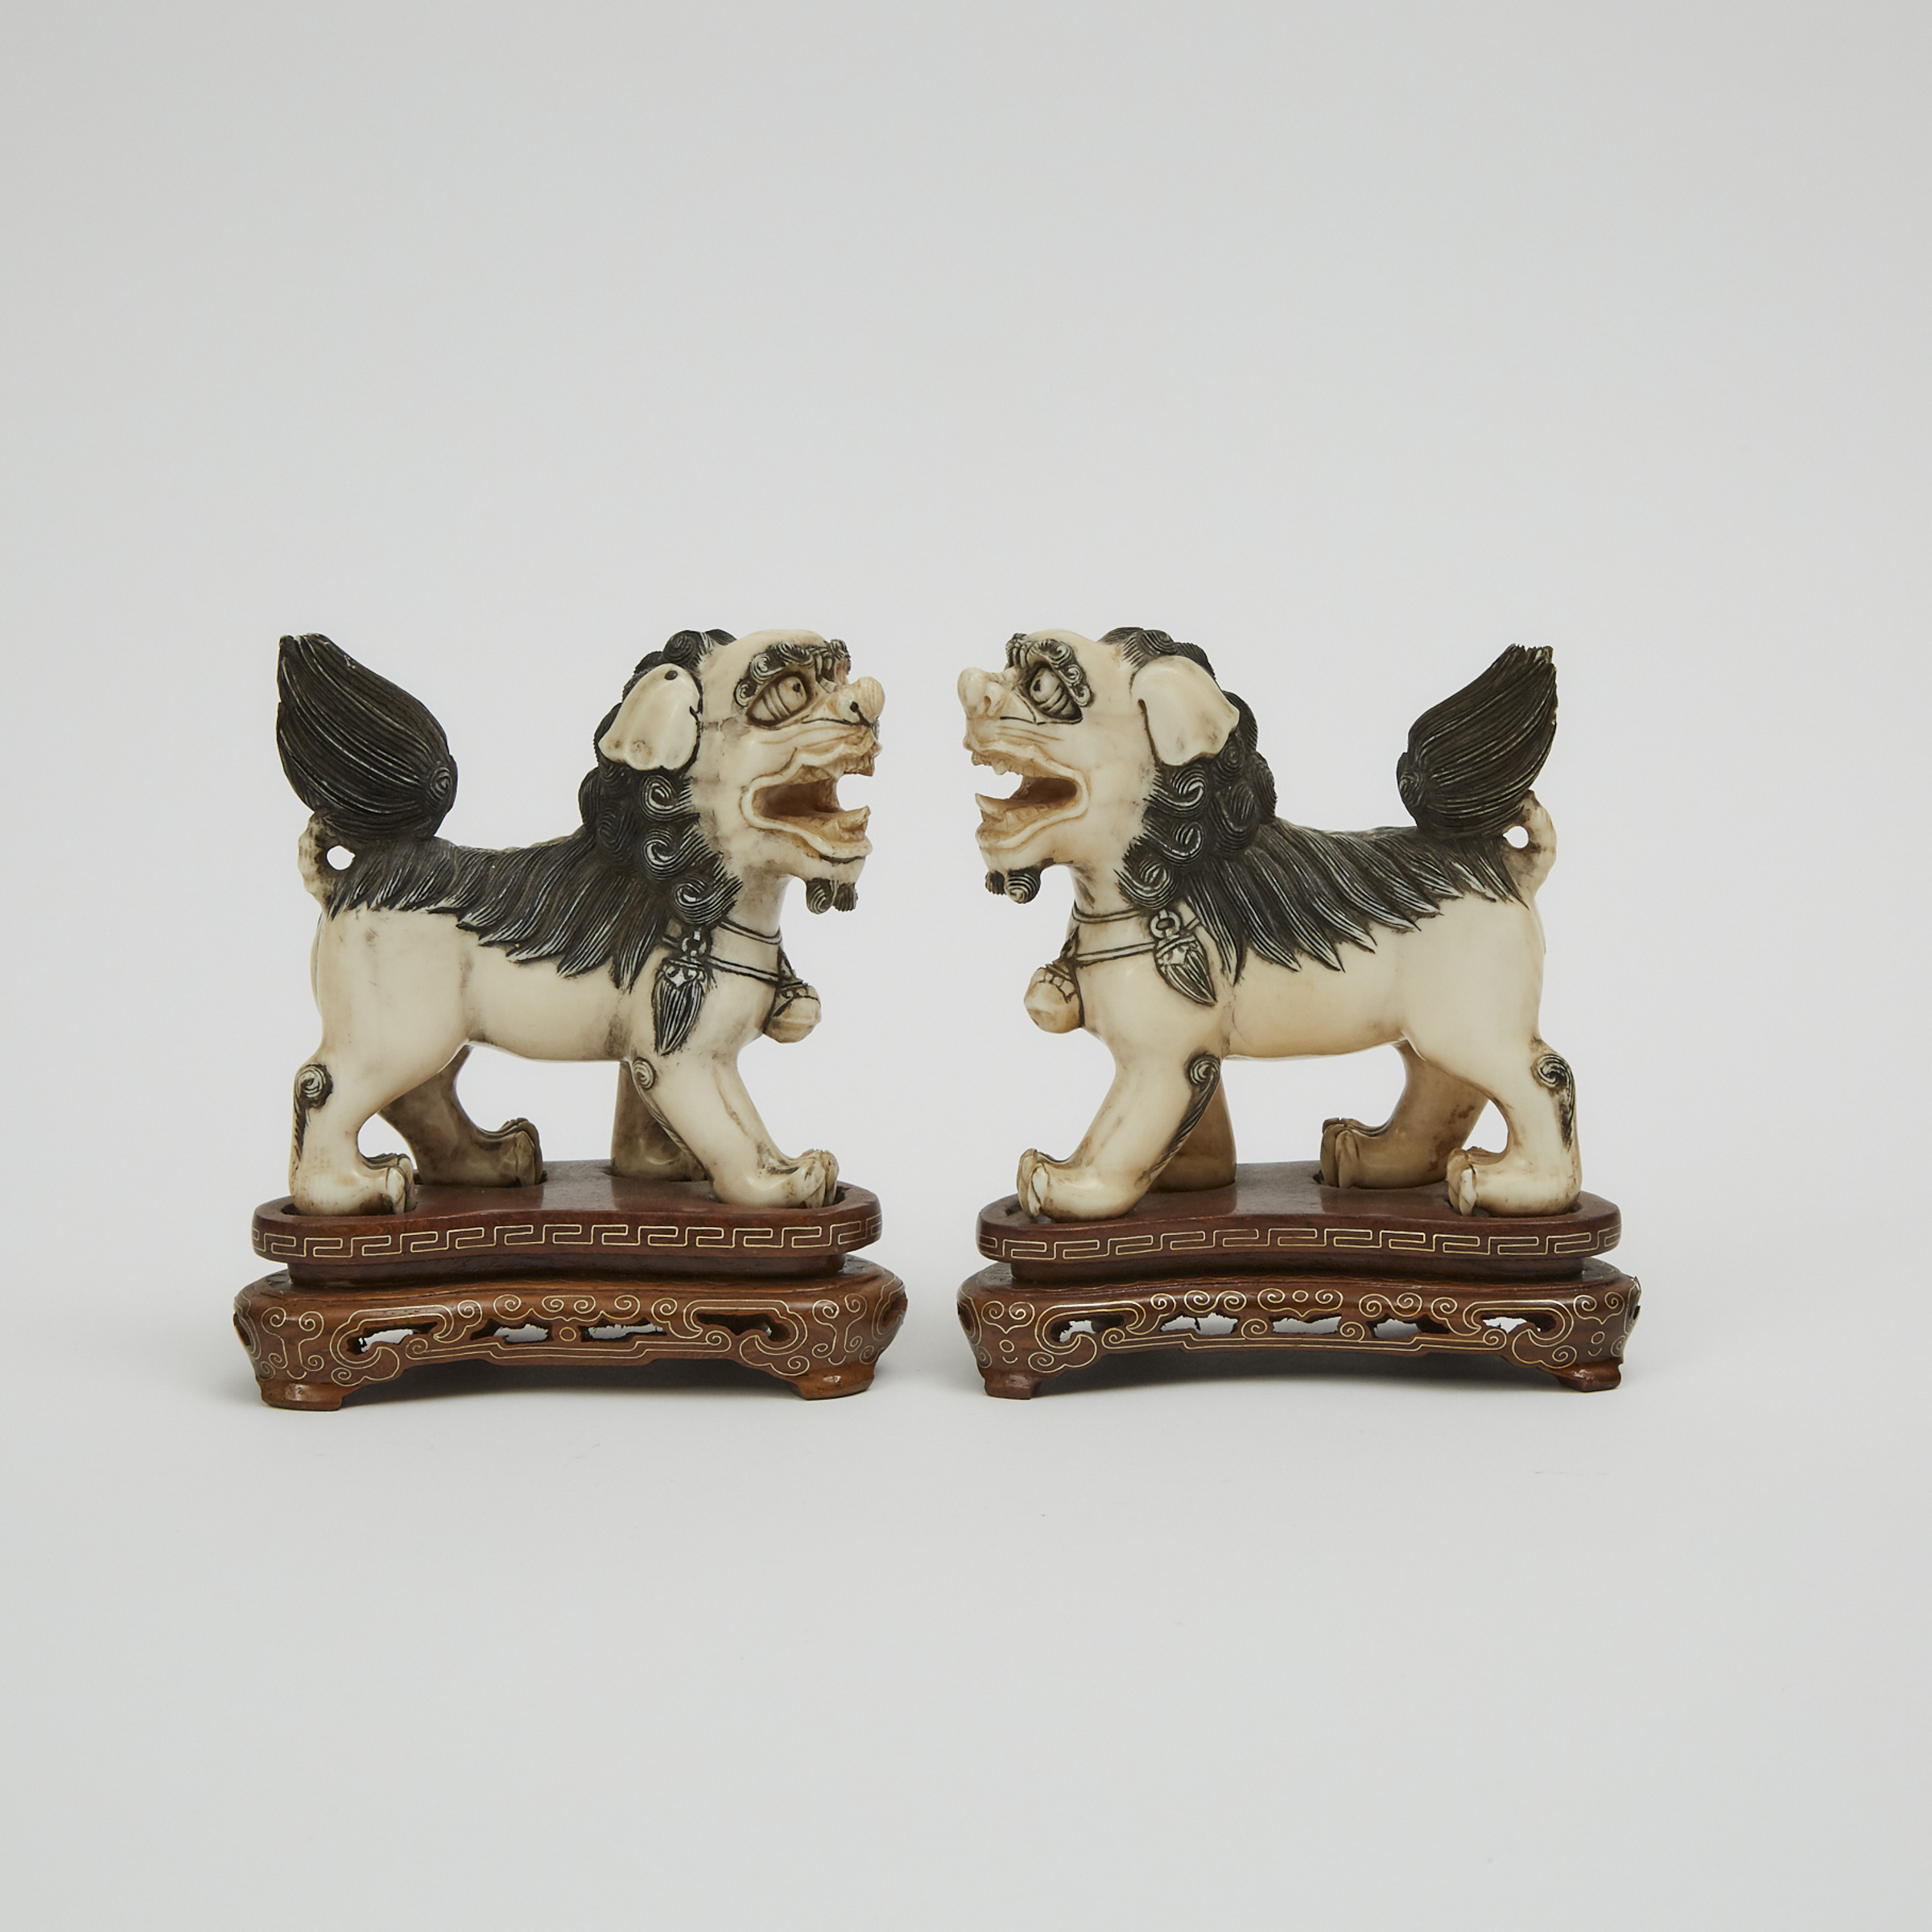 A Pair of Ivory Foo Dogs, Circa 1940